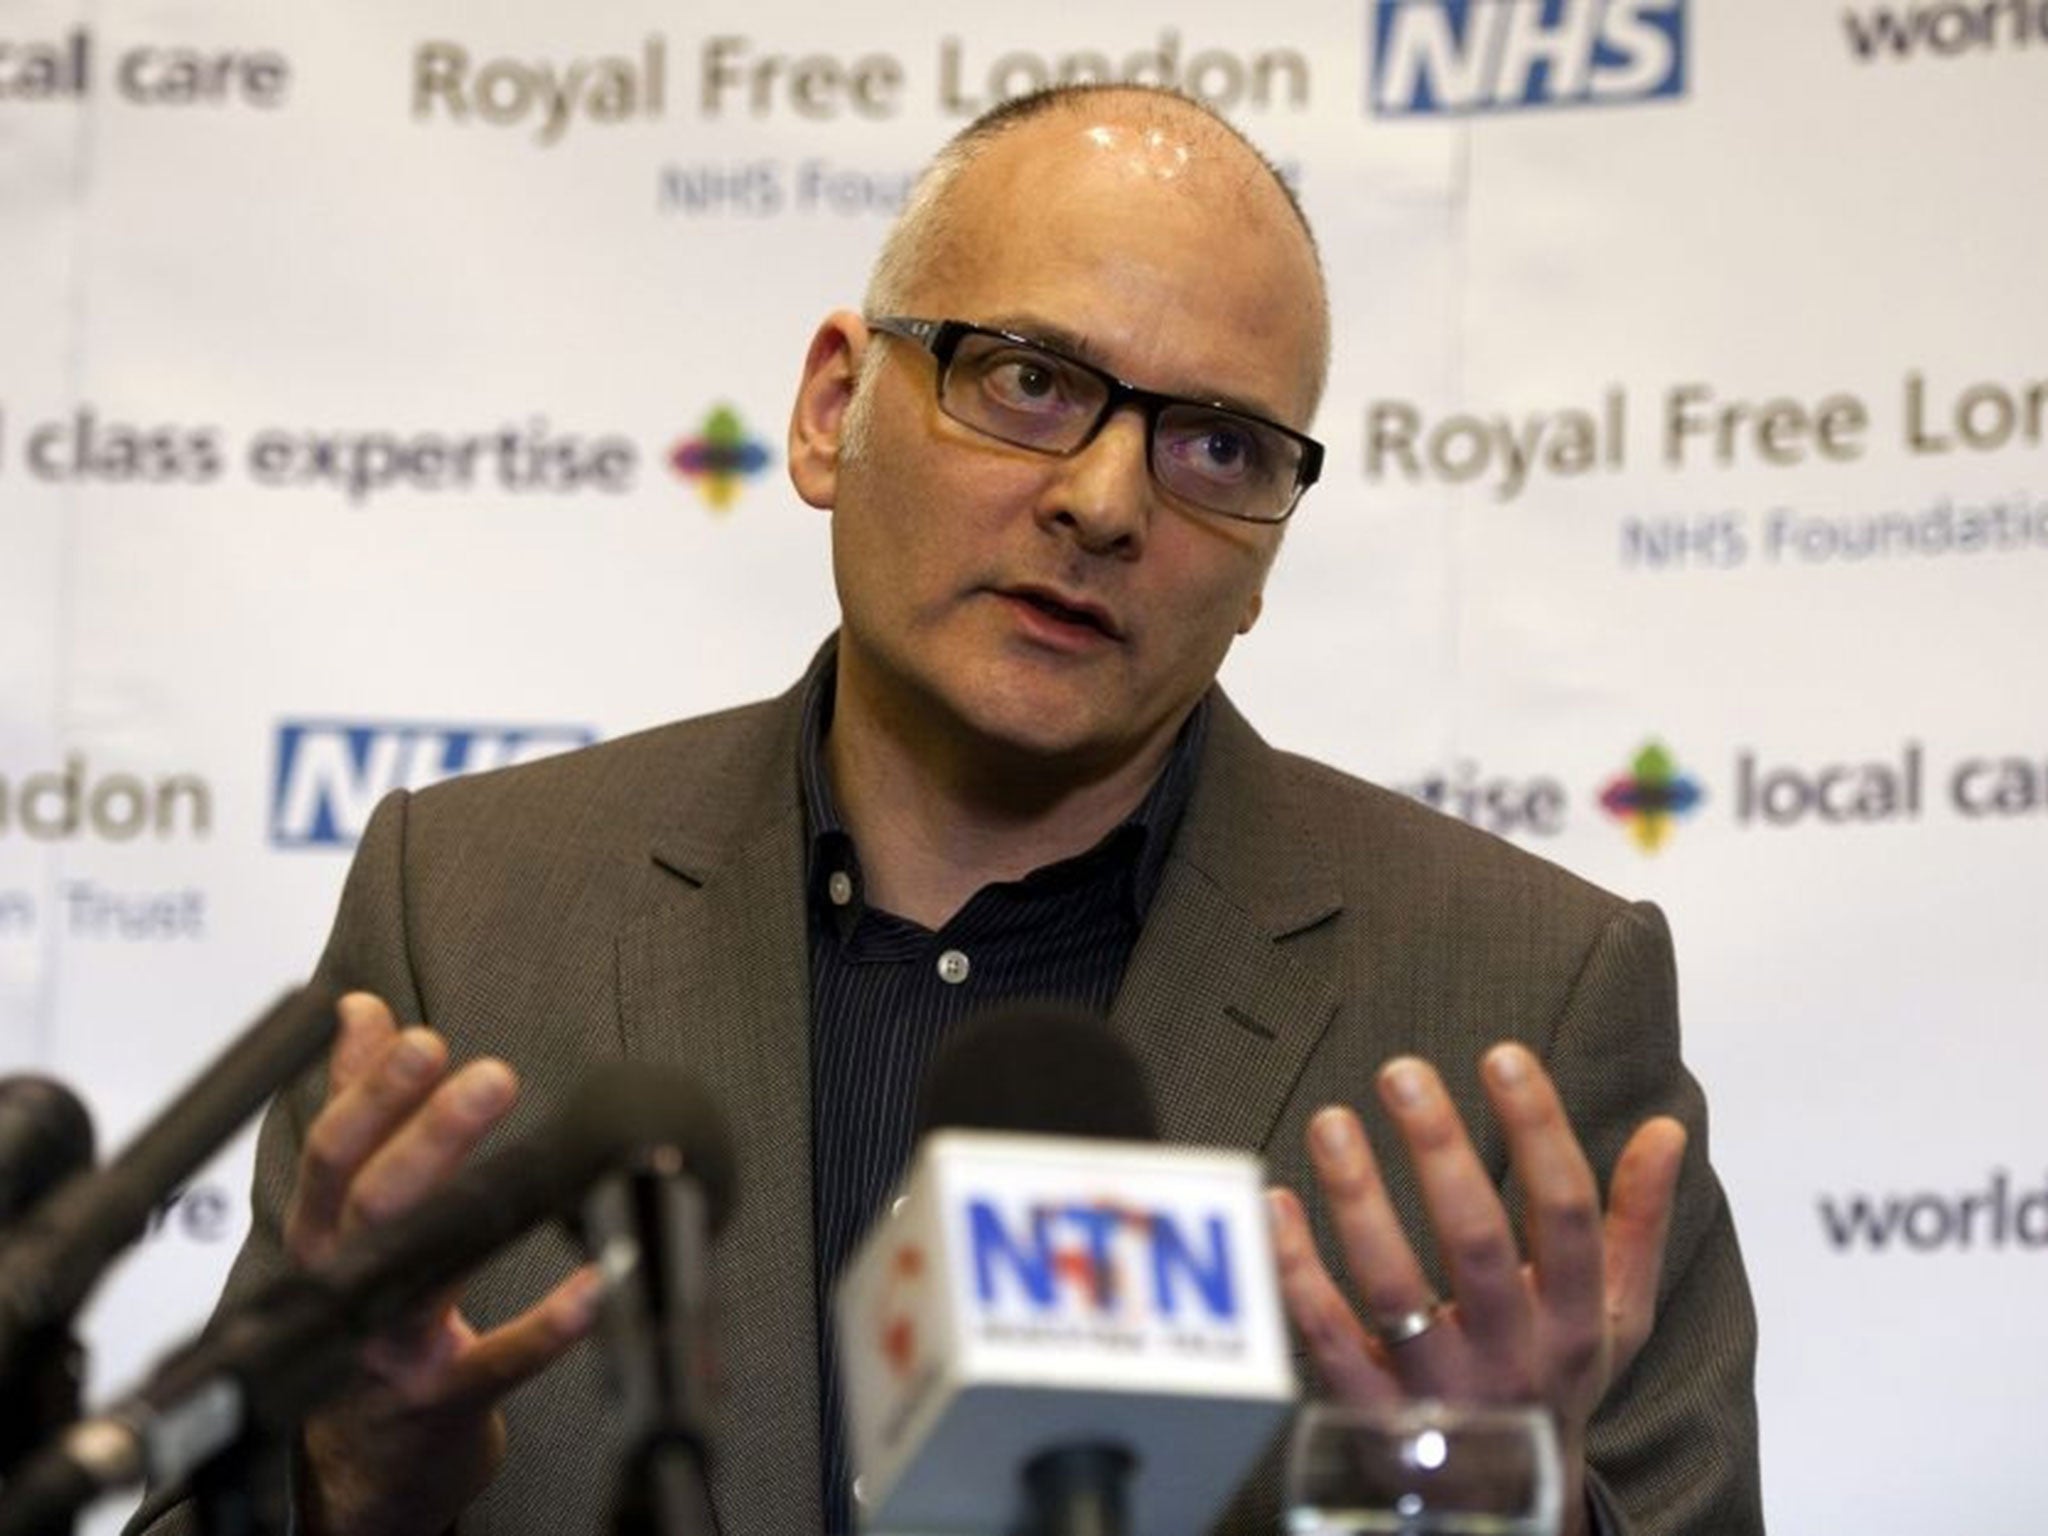 Infectious Diseases Consultant Dr Michael Jacobs gives a press conference regarding Ebola patient Pauline Cafferkey at the Royal Free Hospital in London